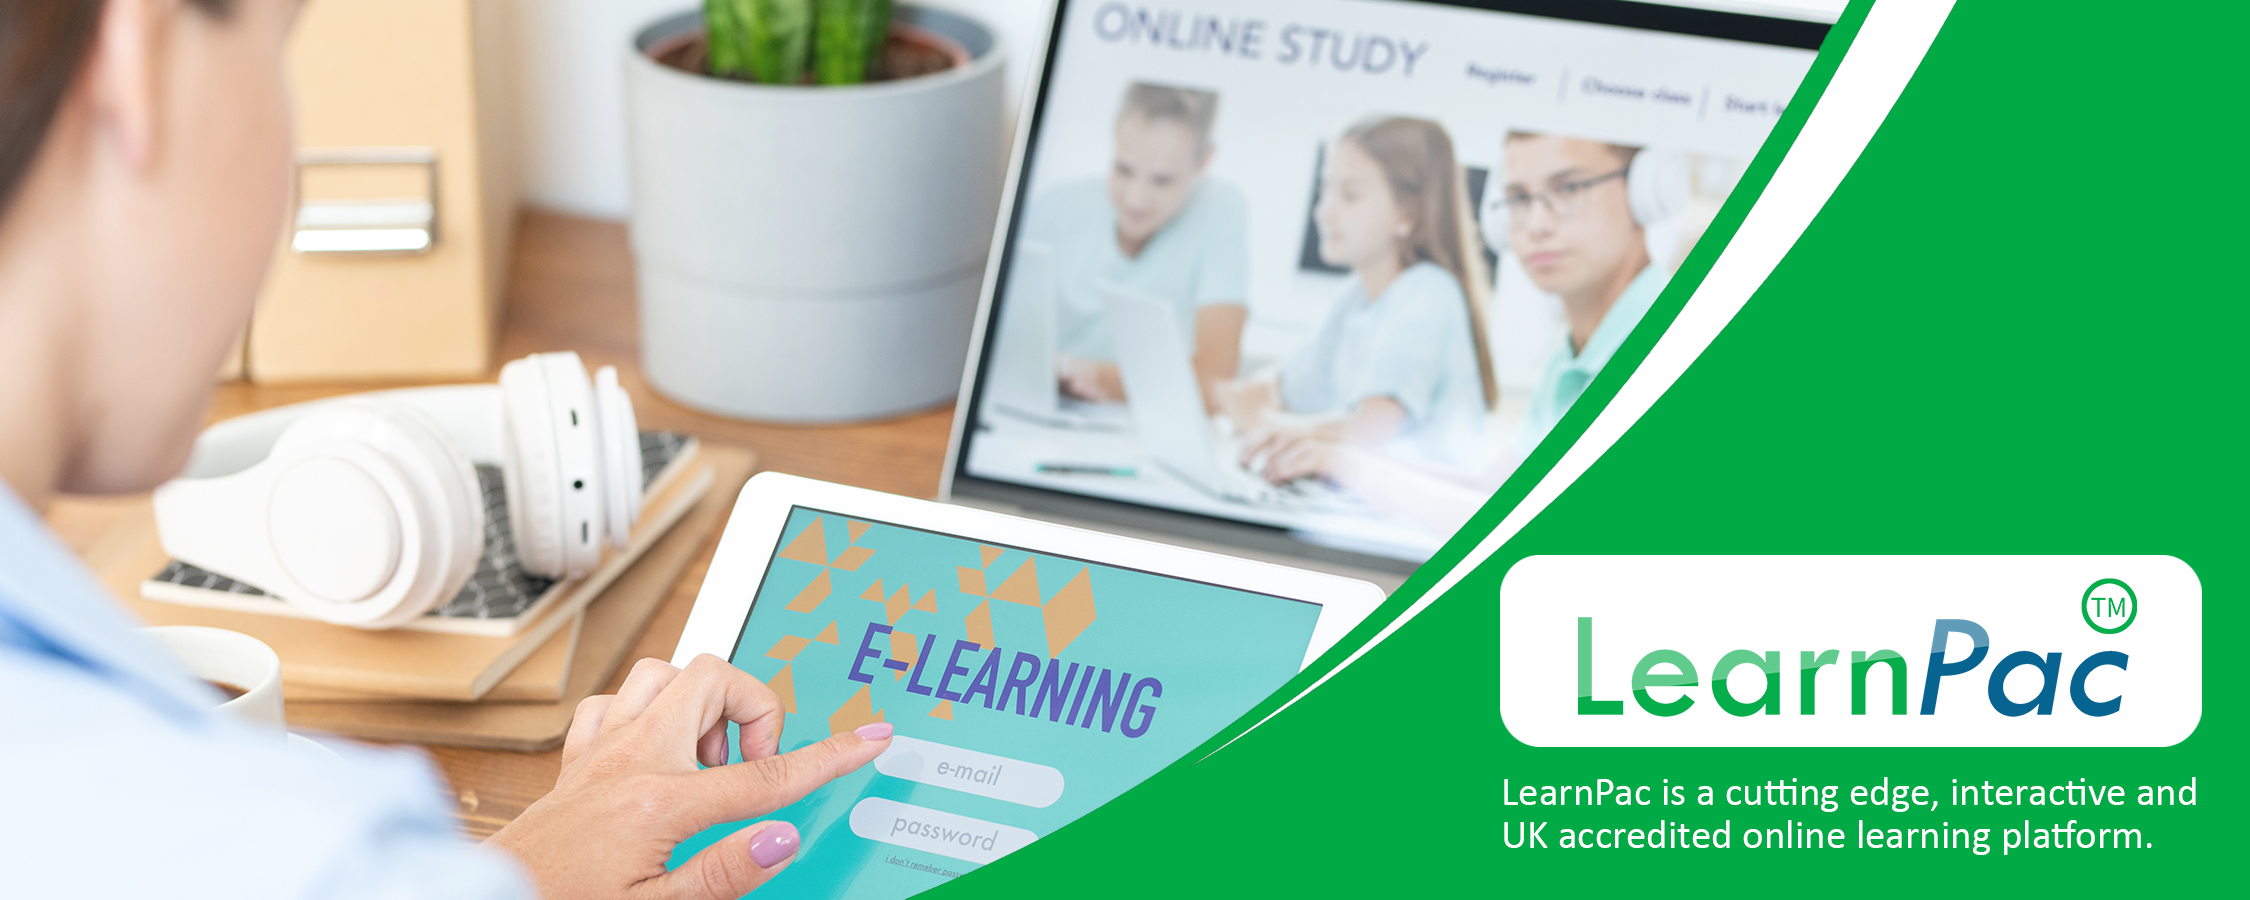 Mandatory Training for Domiciliary Care Workers - Online Learning Courses - E-Learning Courses - LearnPac Systems UK -